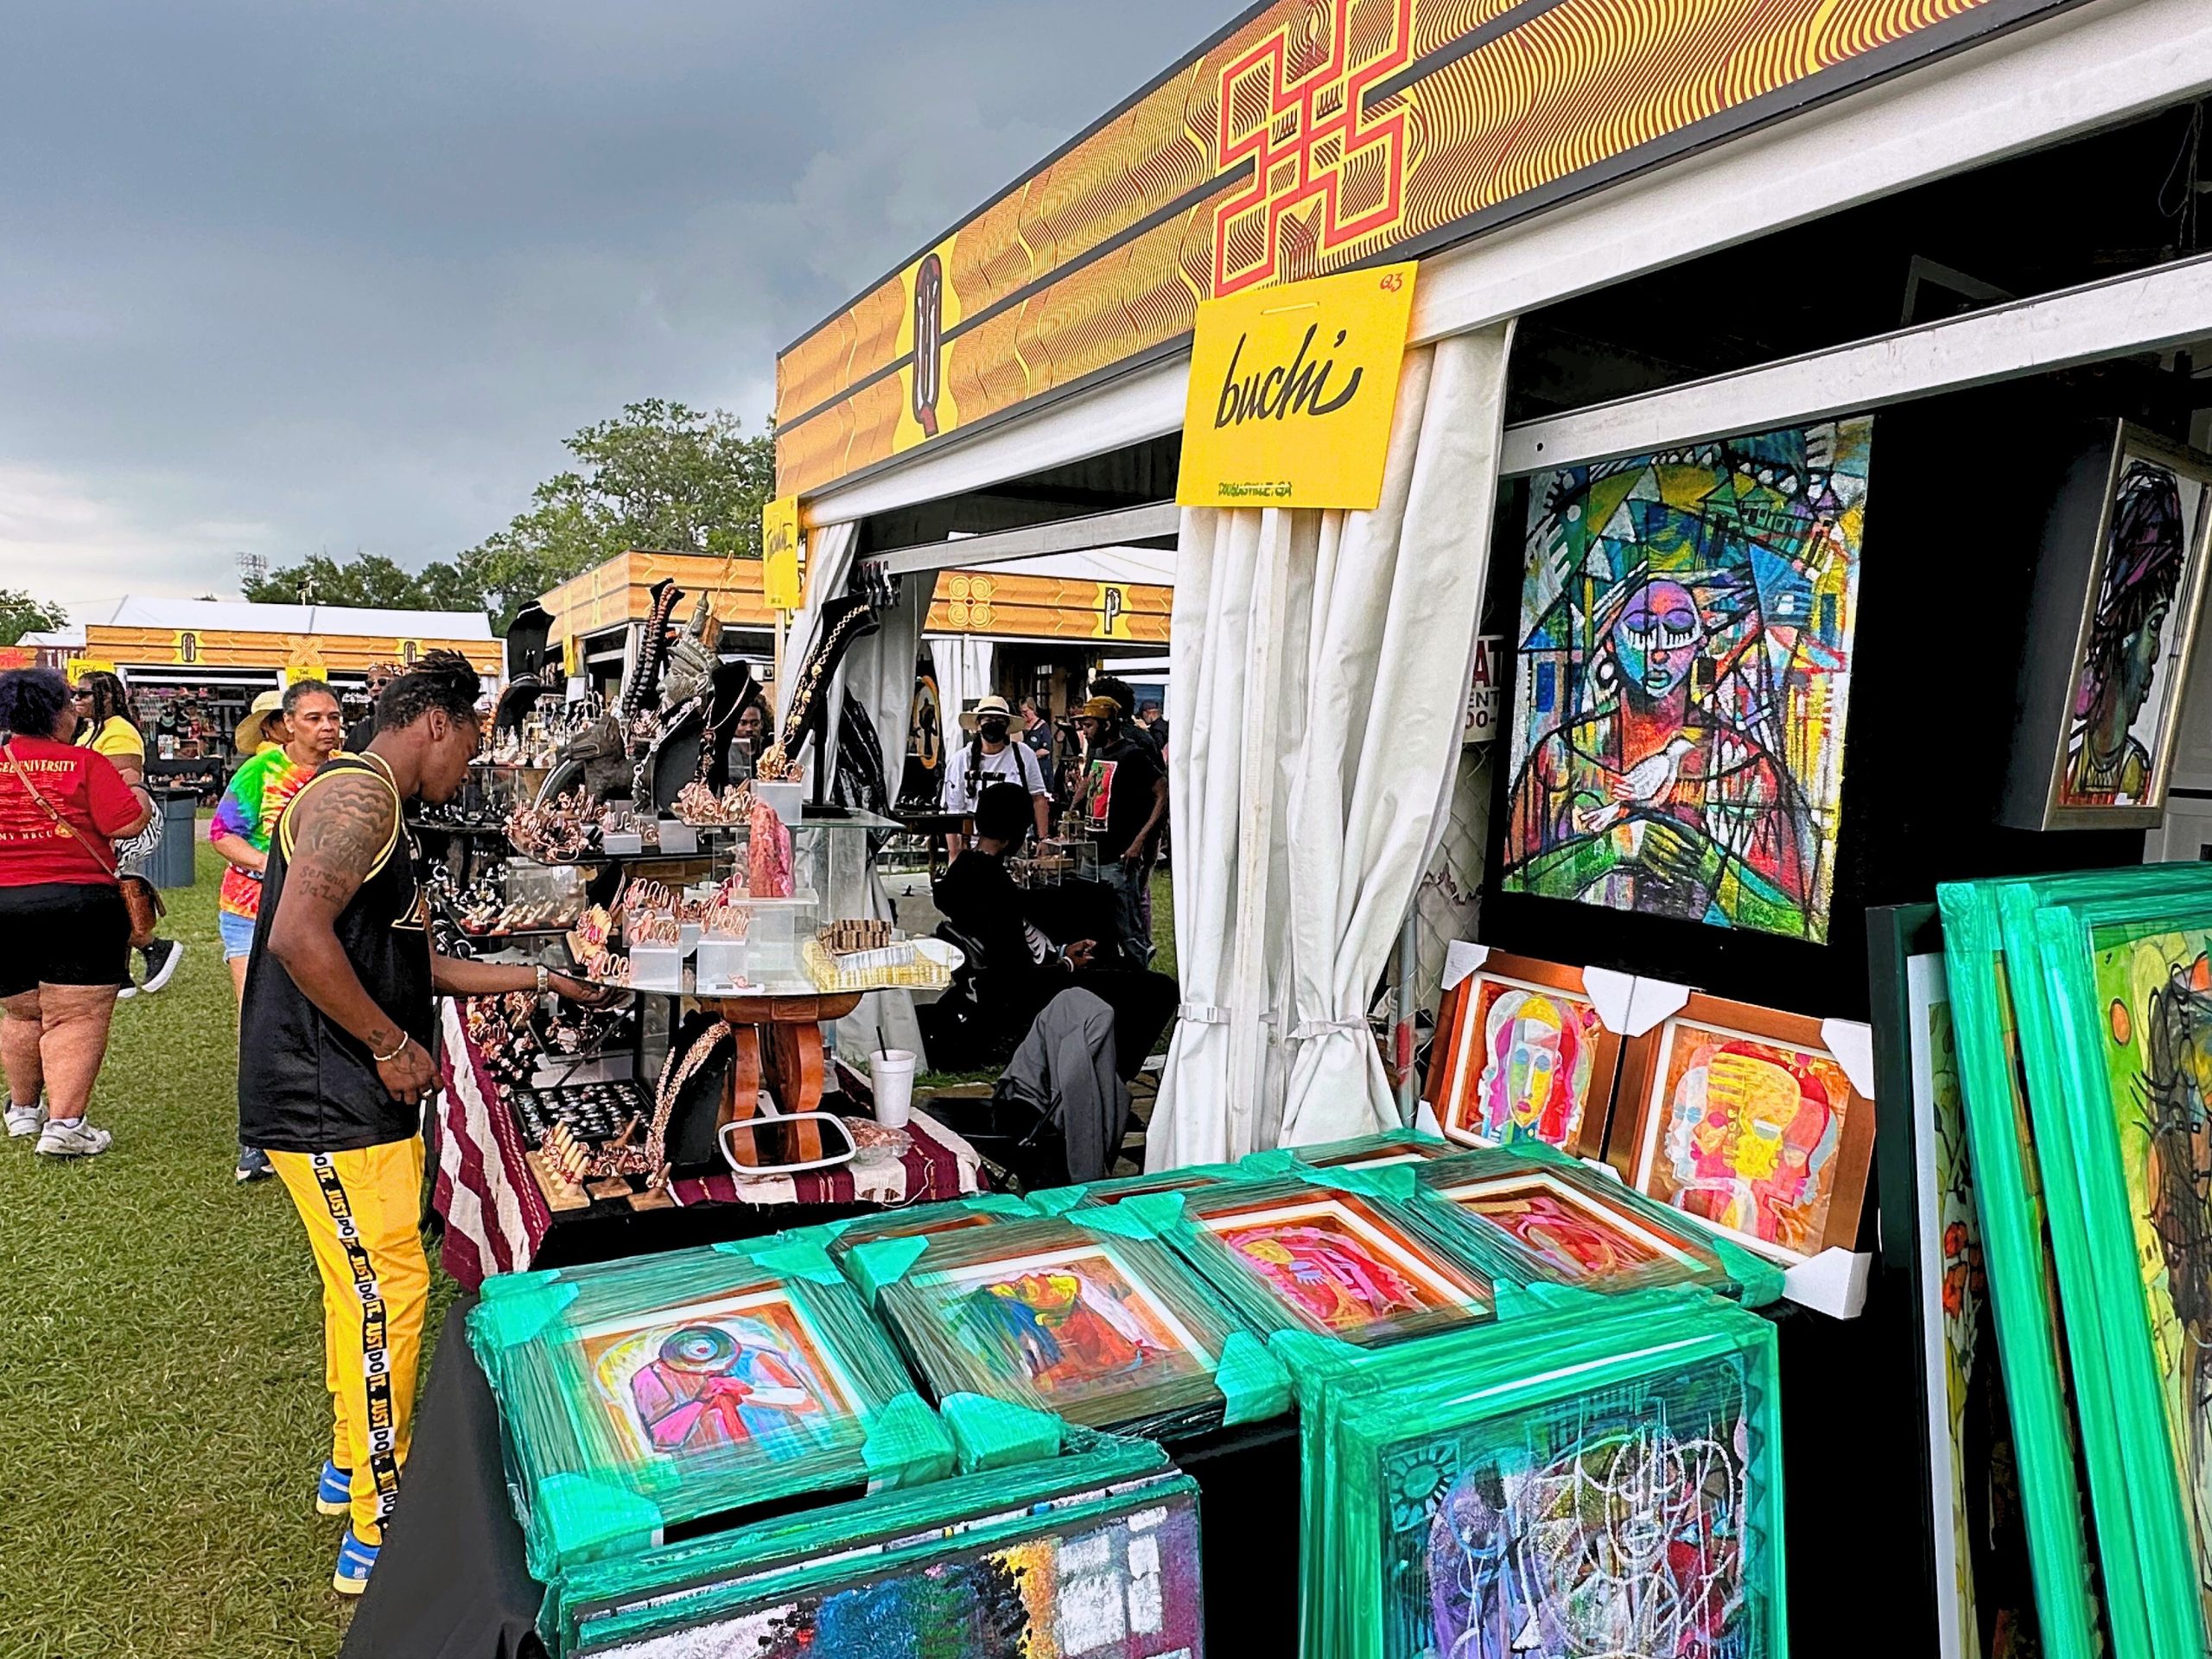 An image of the Congo Square crafts marketplaces.